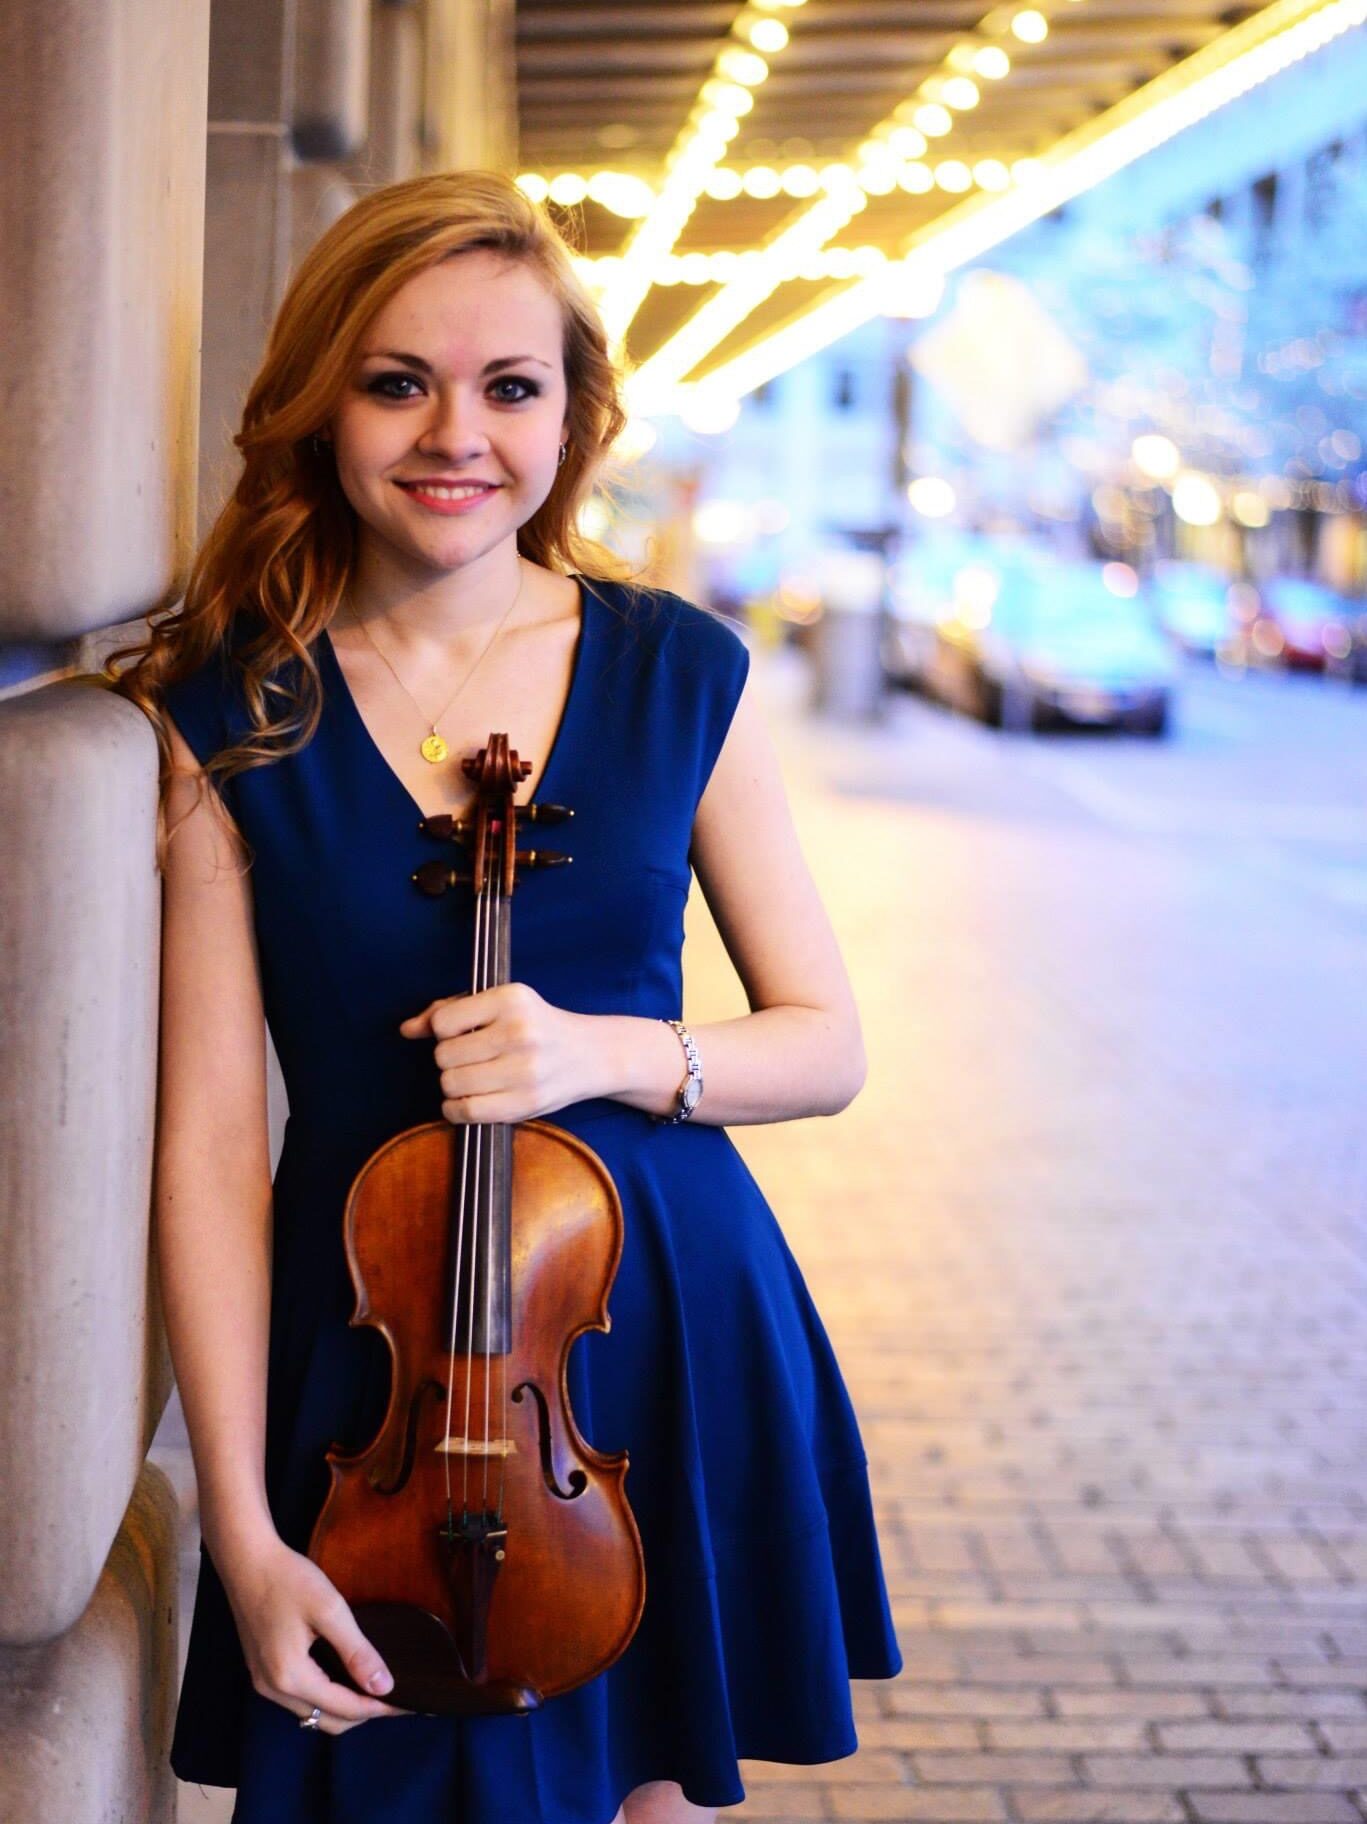 Holly Workman headshot, holding a violin, outside under theater lights